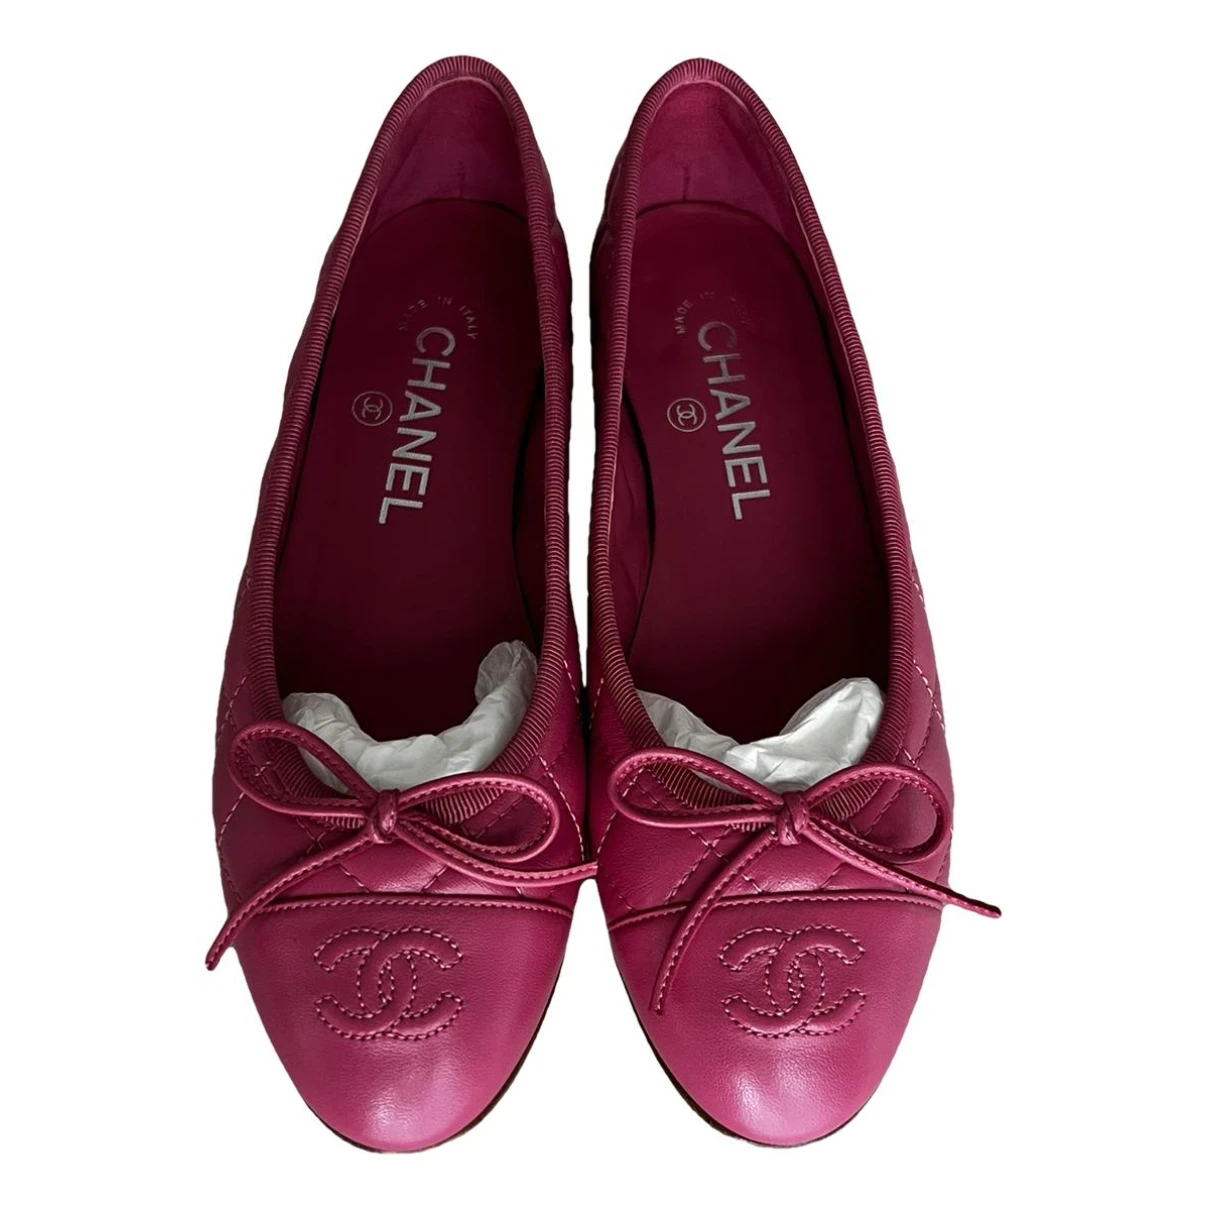 shoes Chanel ballet flats for Female Leather 35.5 EU. Used condition